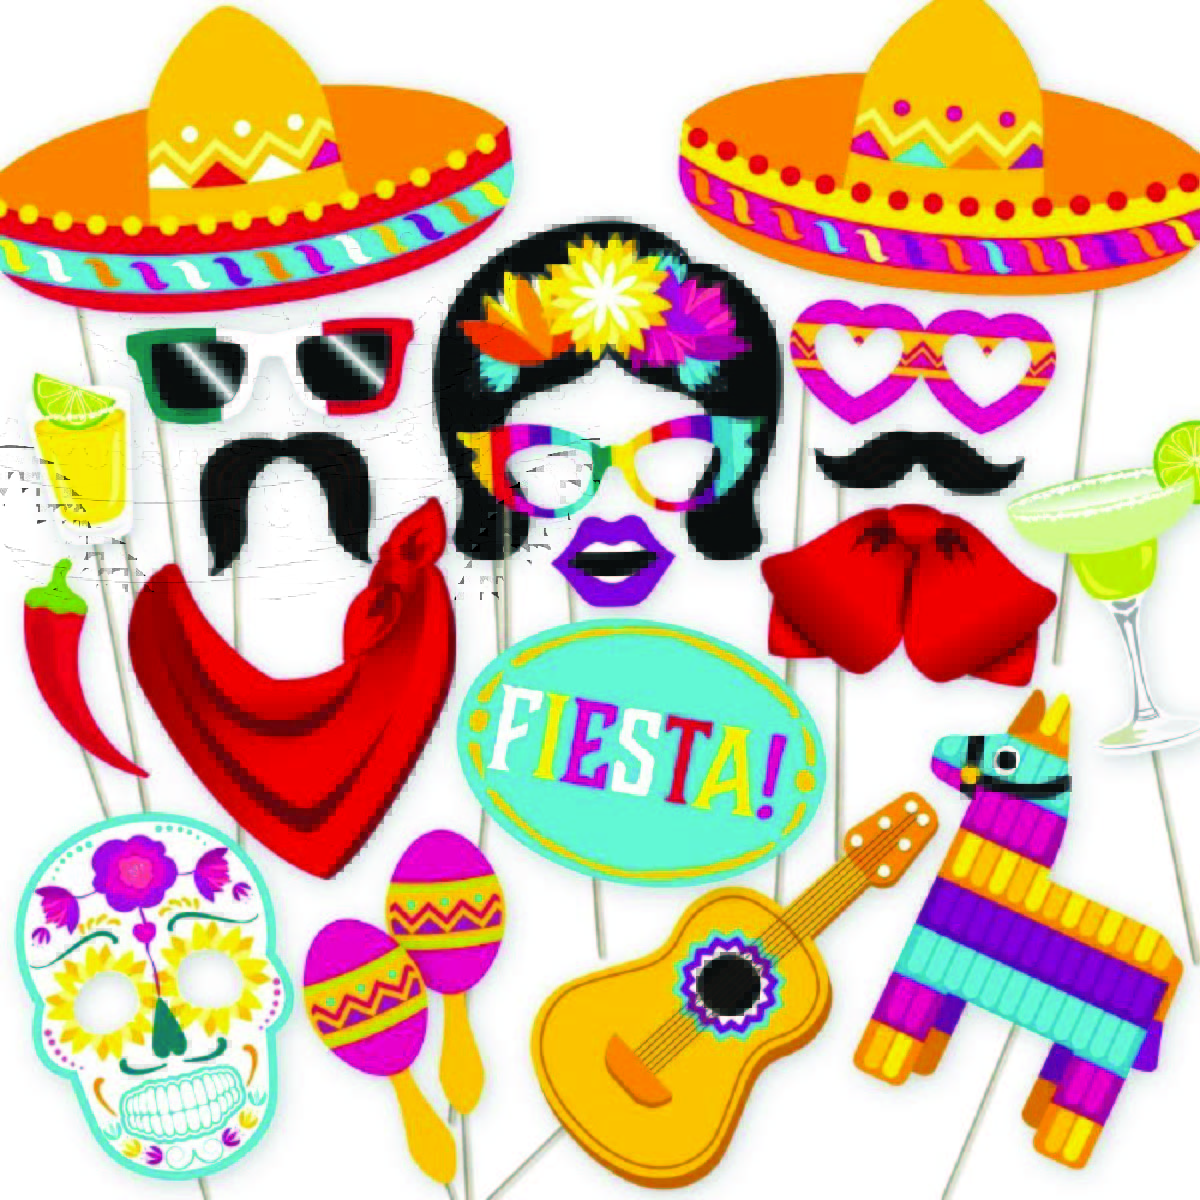 Several different fiesta-themed photo booth props.